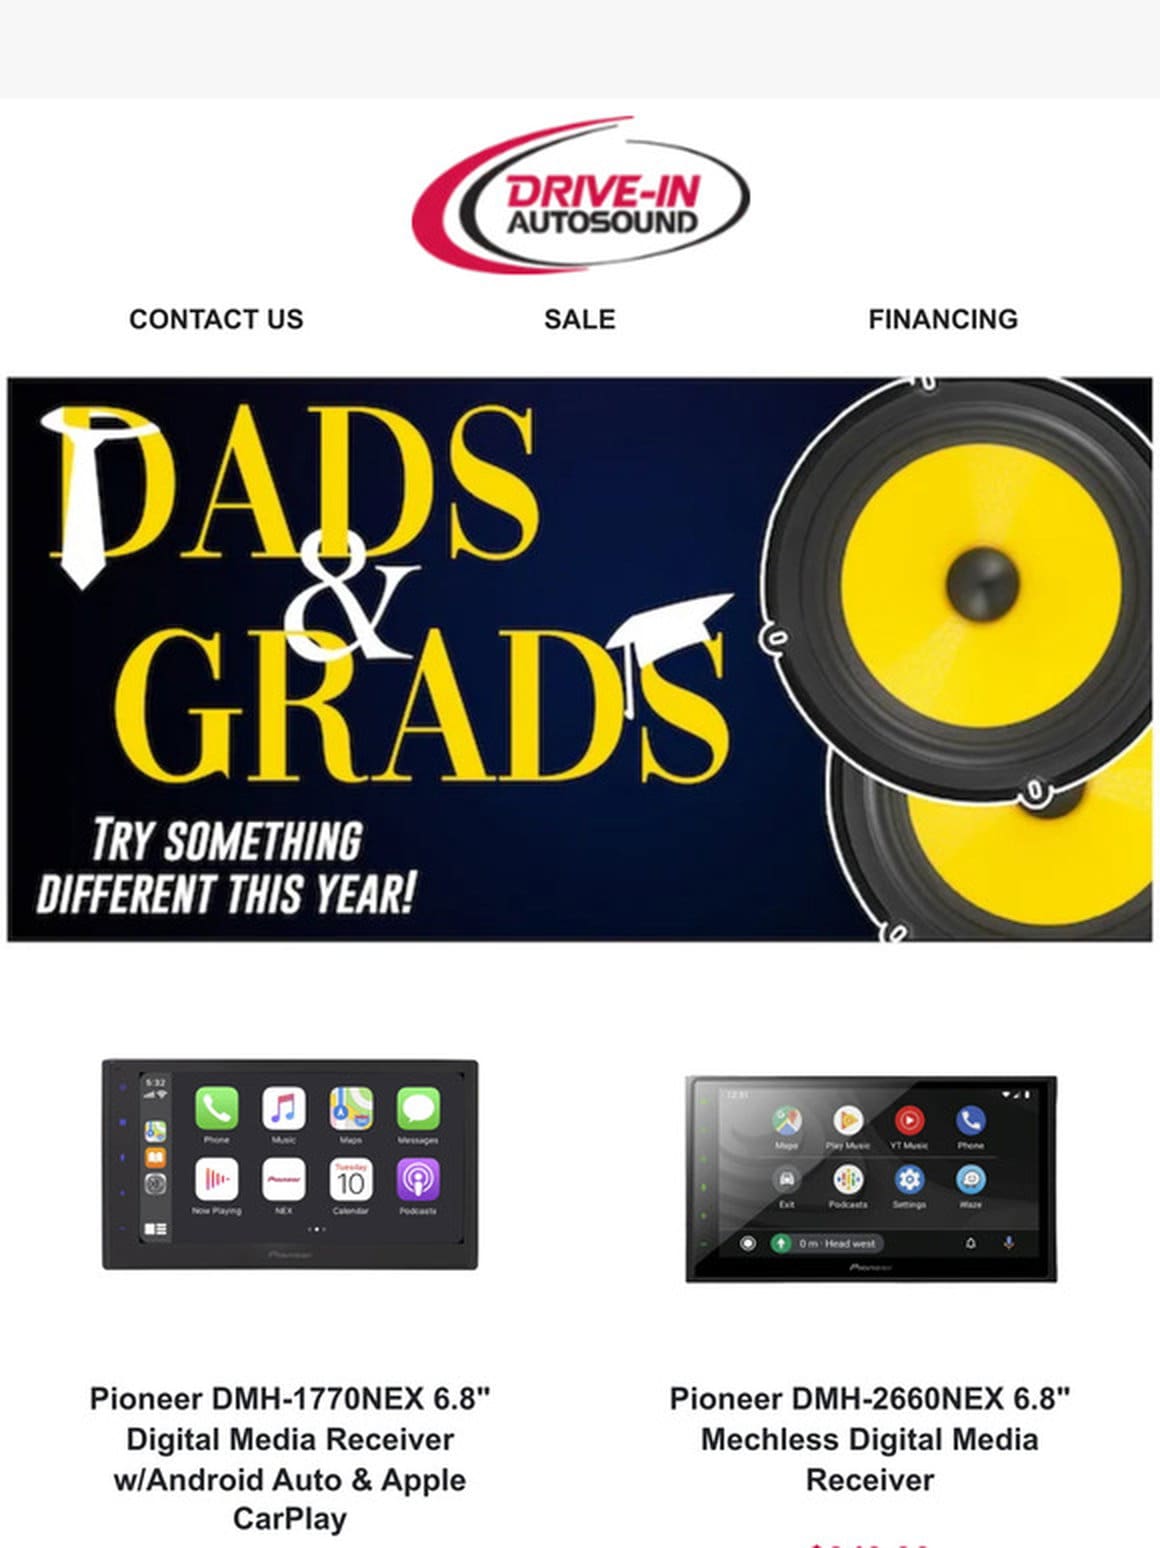 Celebrate Dads & Grads With the Gift of Sound!